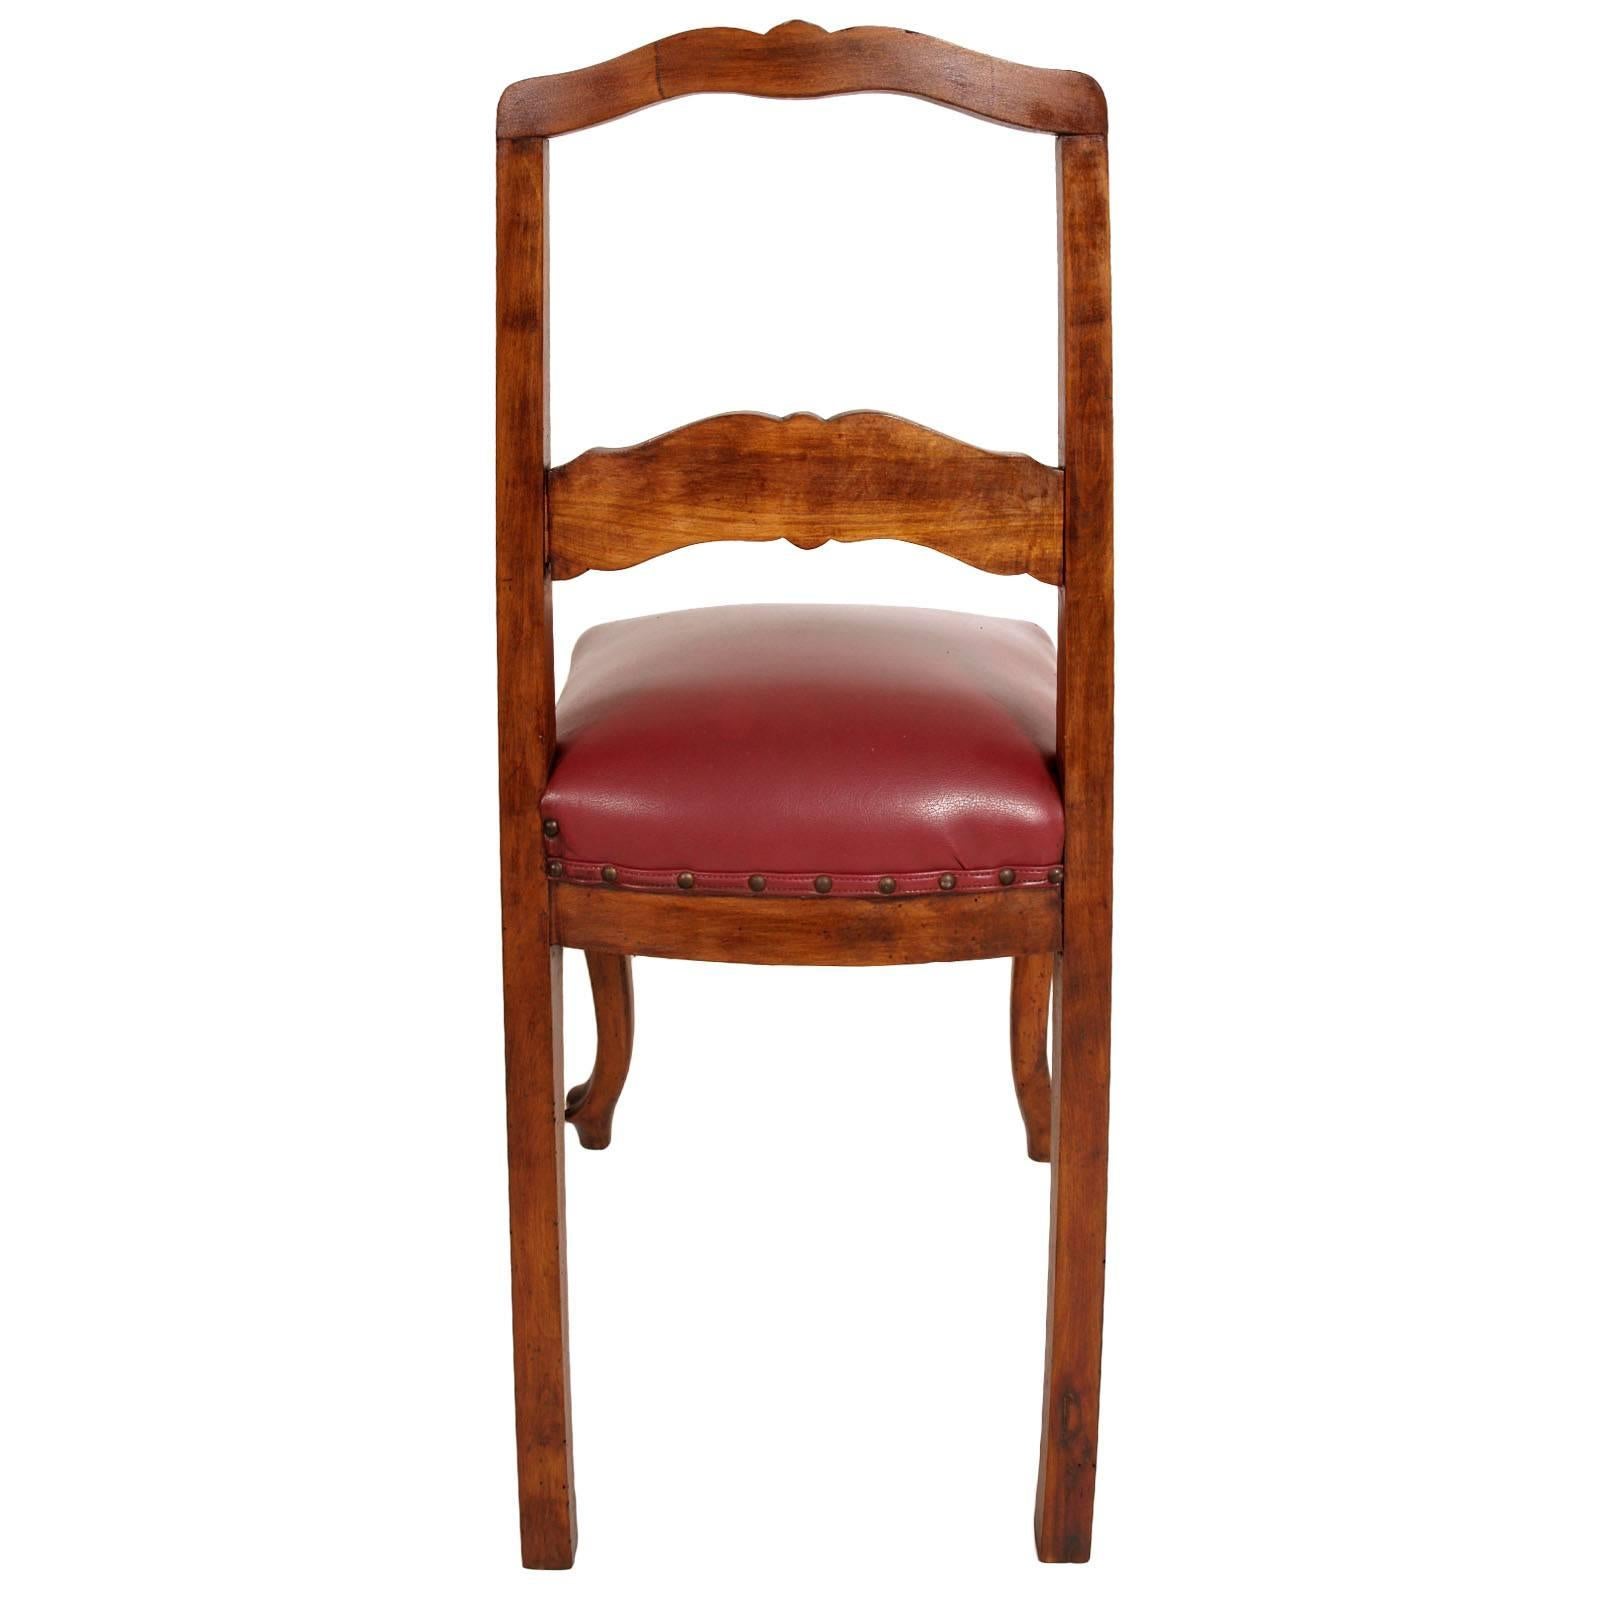 Pair Art Nouveau Neoclassical Chairs , Hand-Carved Walnut, Spring Leather Seat For Sale 1